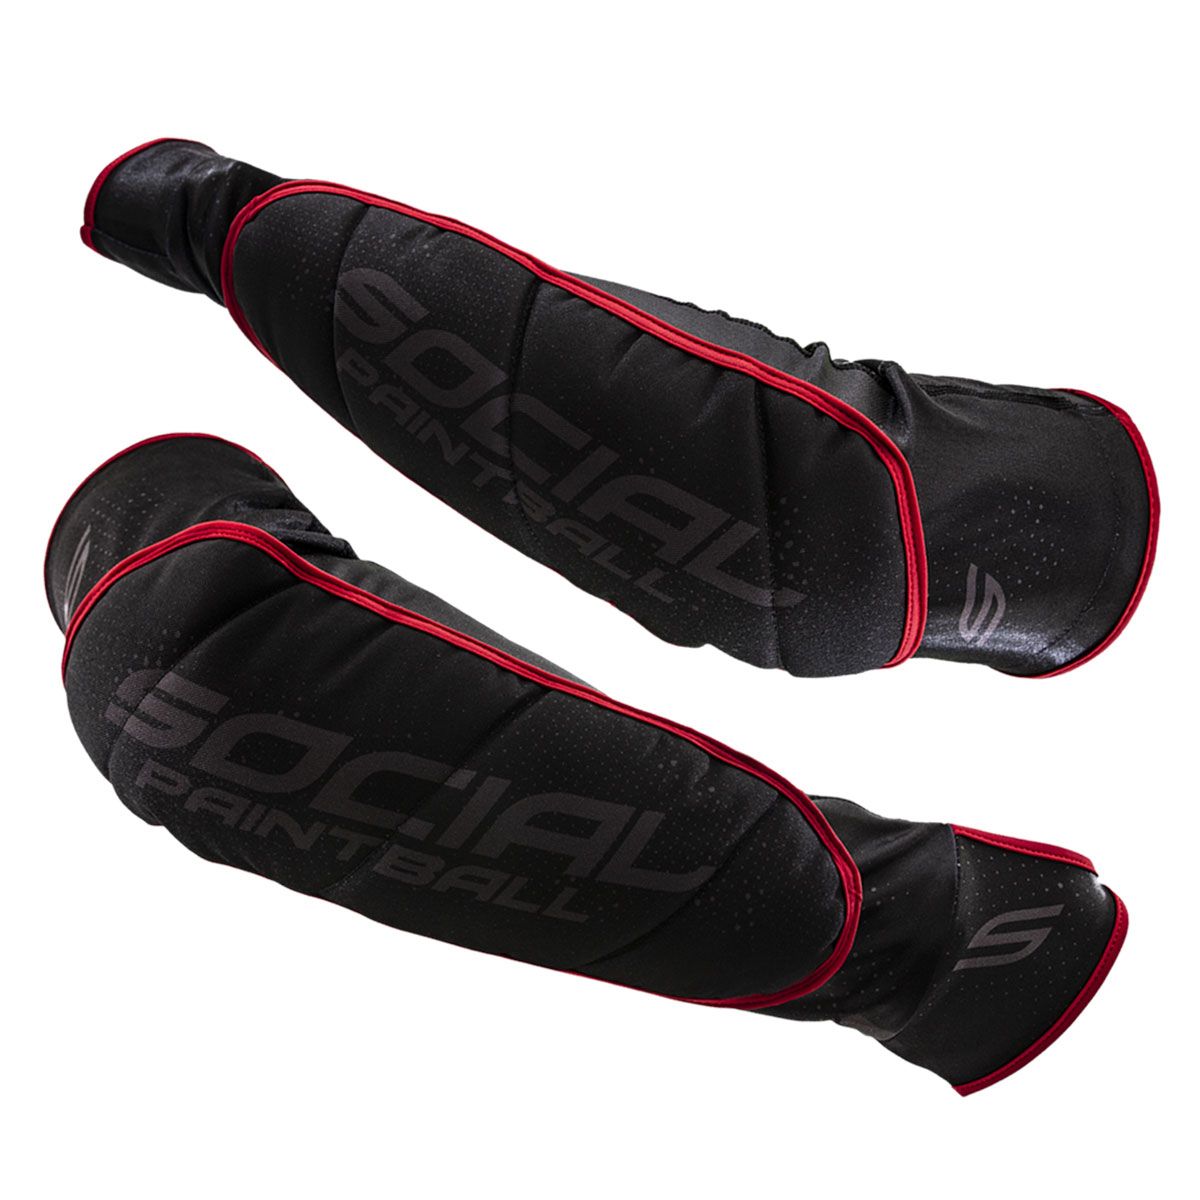 SMPL Paintball Elbow/Arm Pads, Black Red - Social Paintball